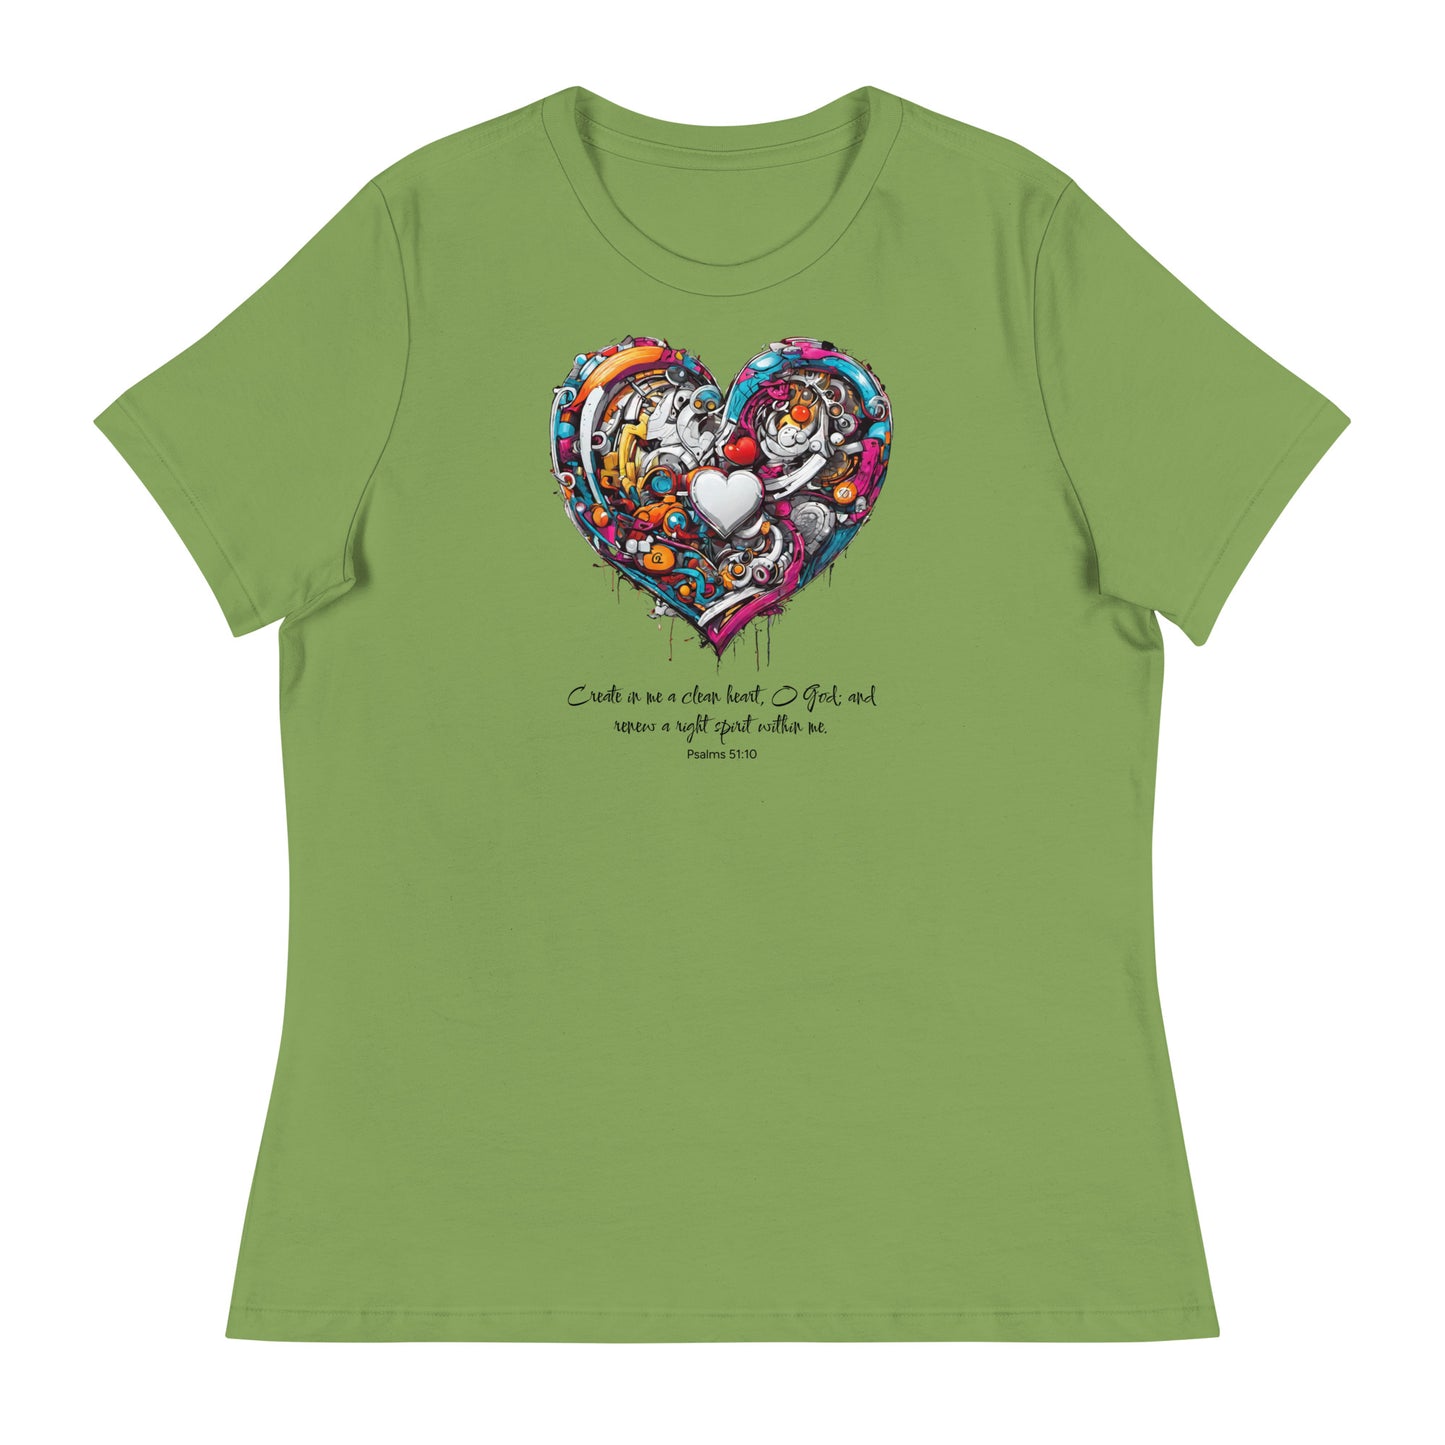 Blessed are the Pure in Heart Women's Christian T-Shirt Leaf